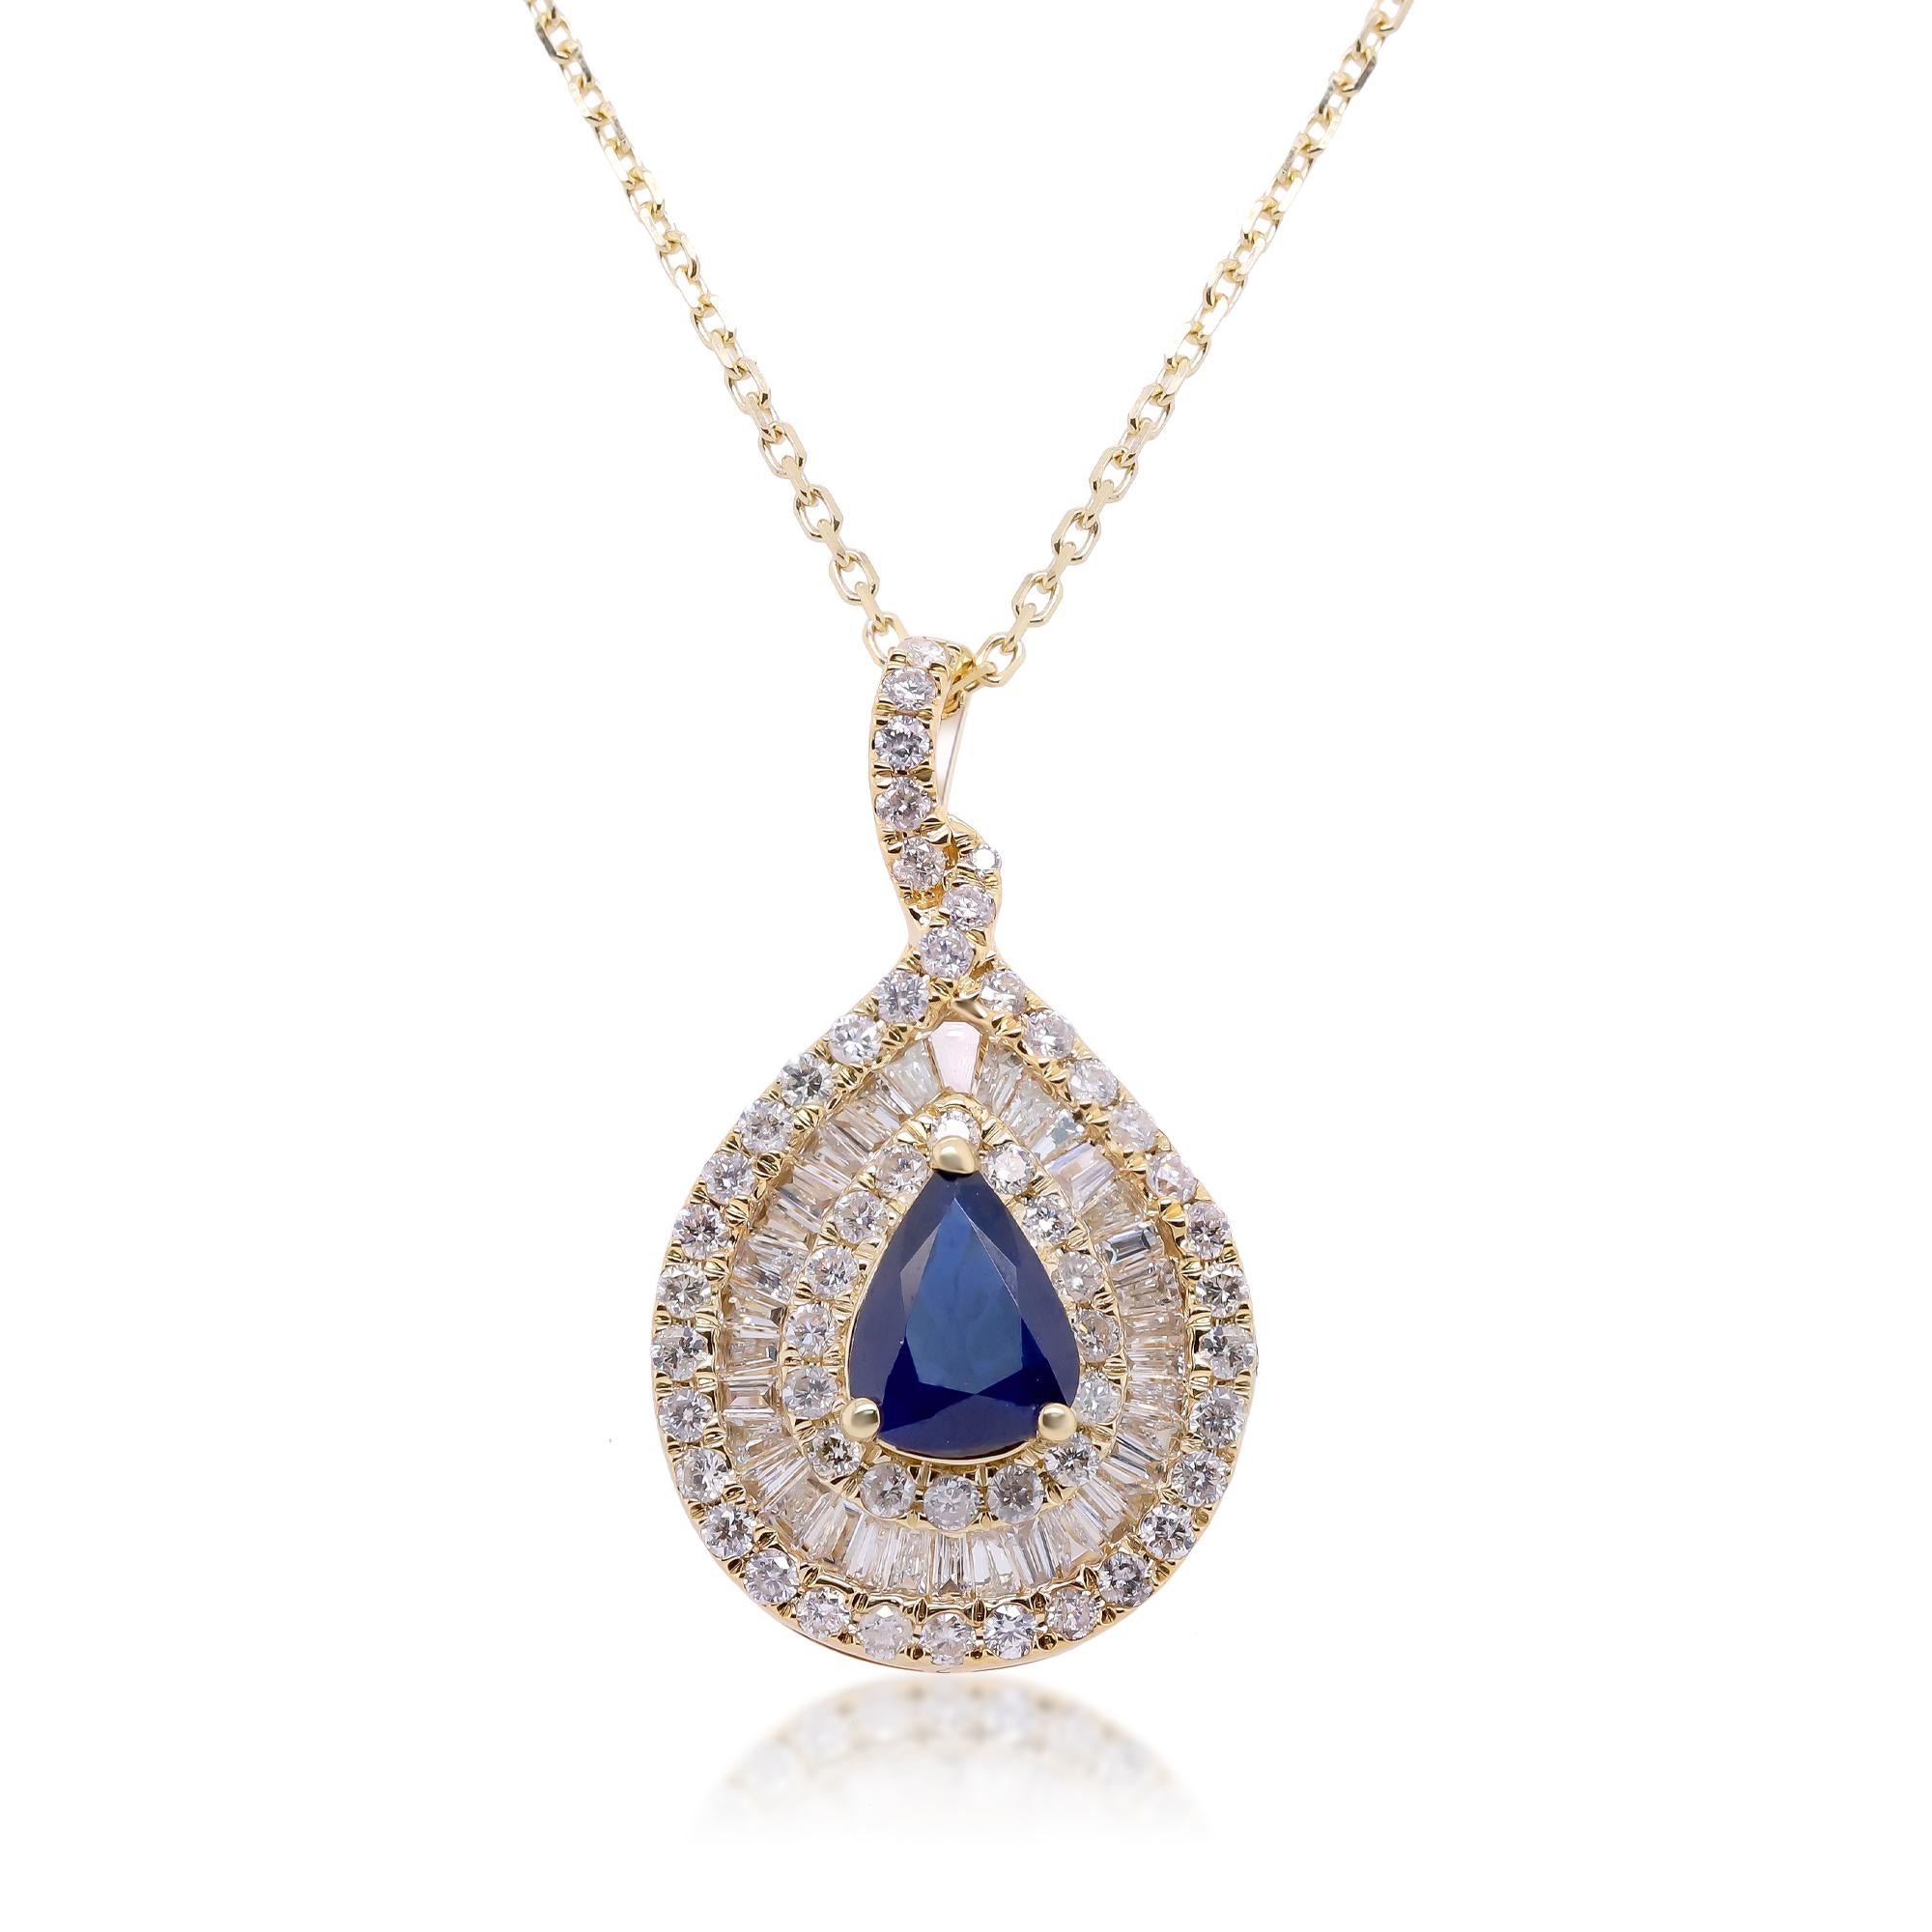 Pear Cut 0.70 Carat Pear-Cut Blue Sapphire with Diamond Accents 14K Yellow Gold Pendant